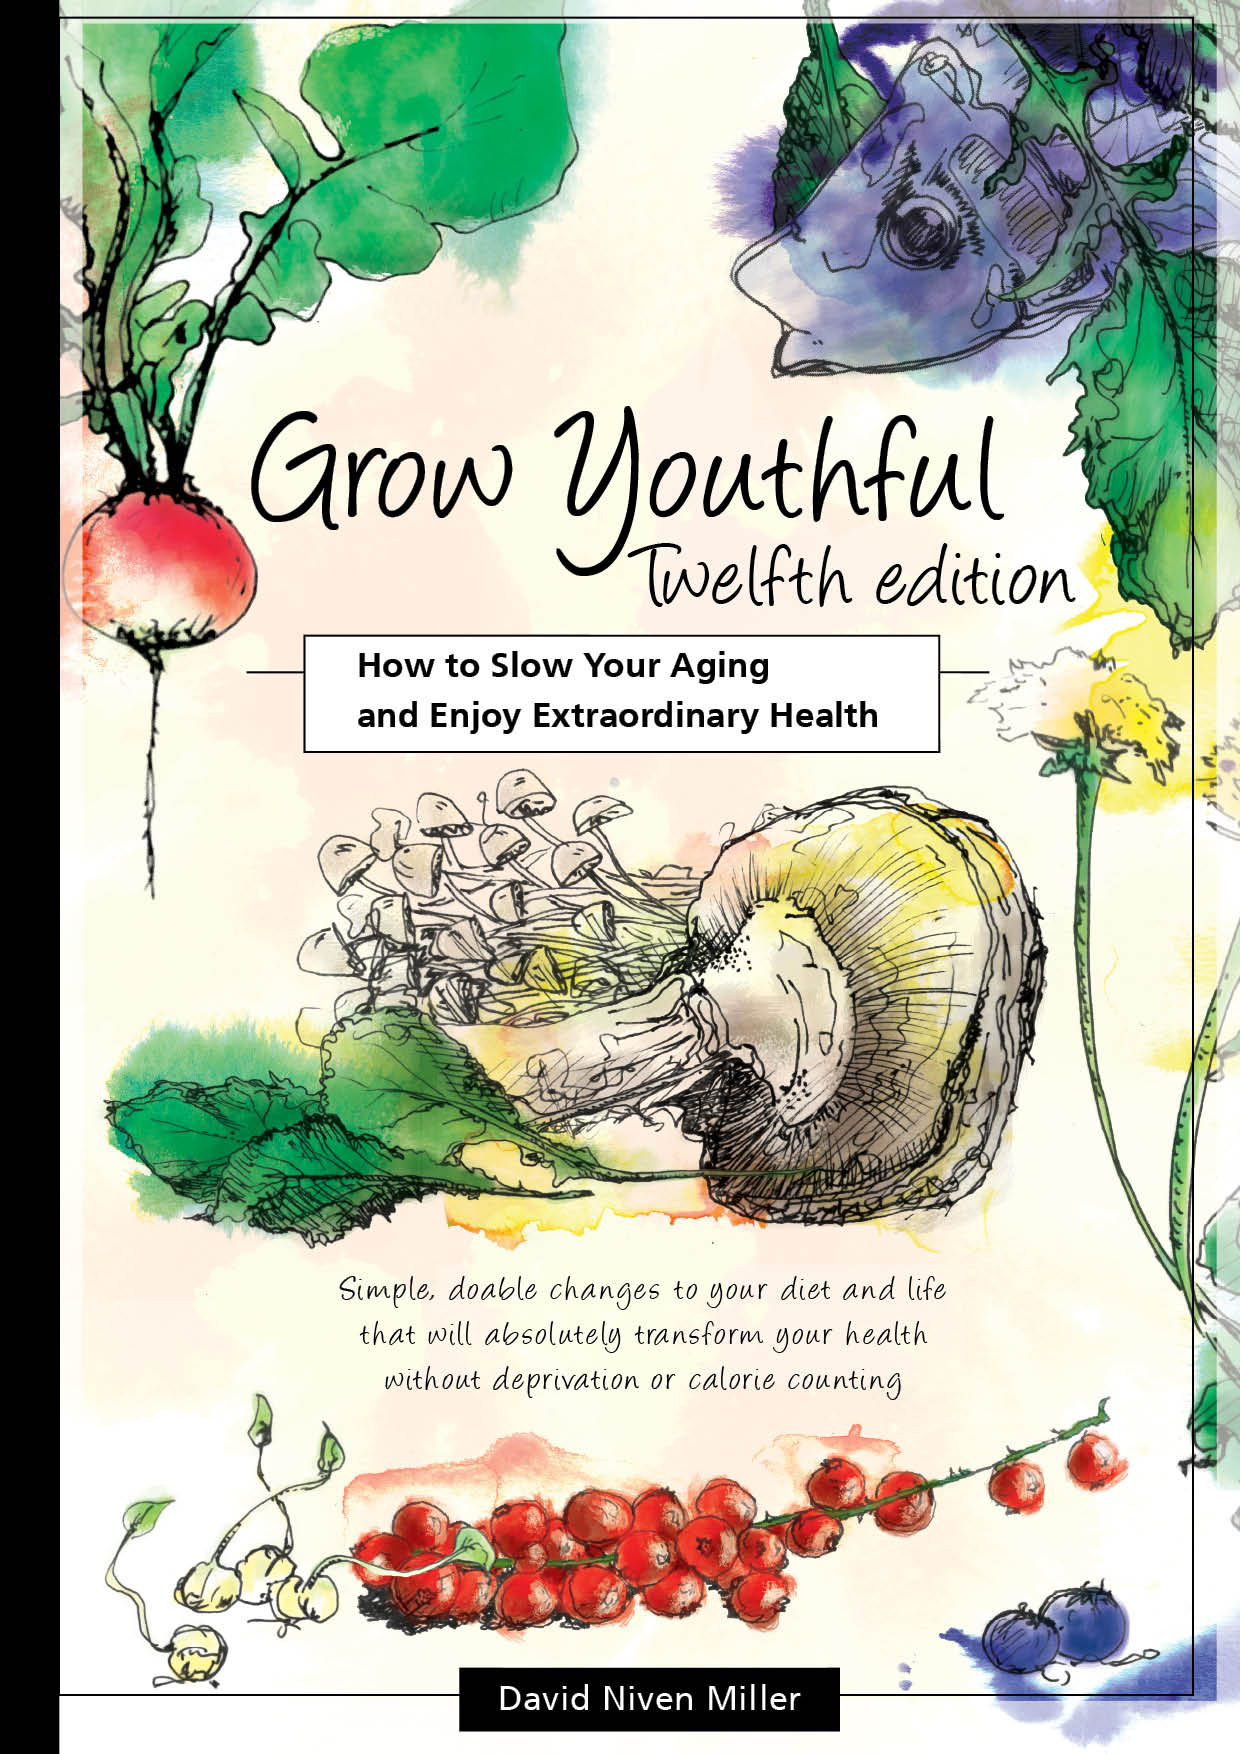 Grow Youthful: How to Slow Your Aging and Enjoy Extraordinary Health